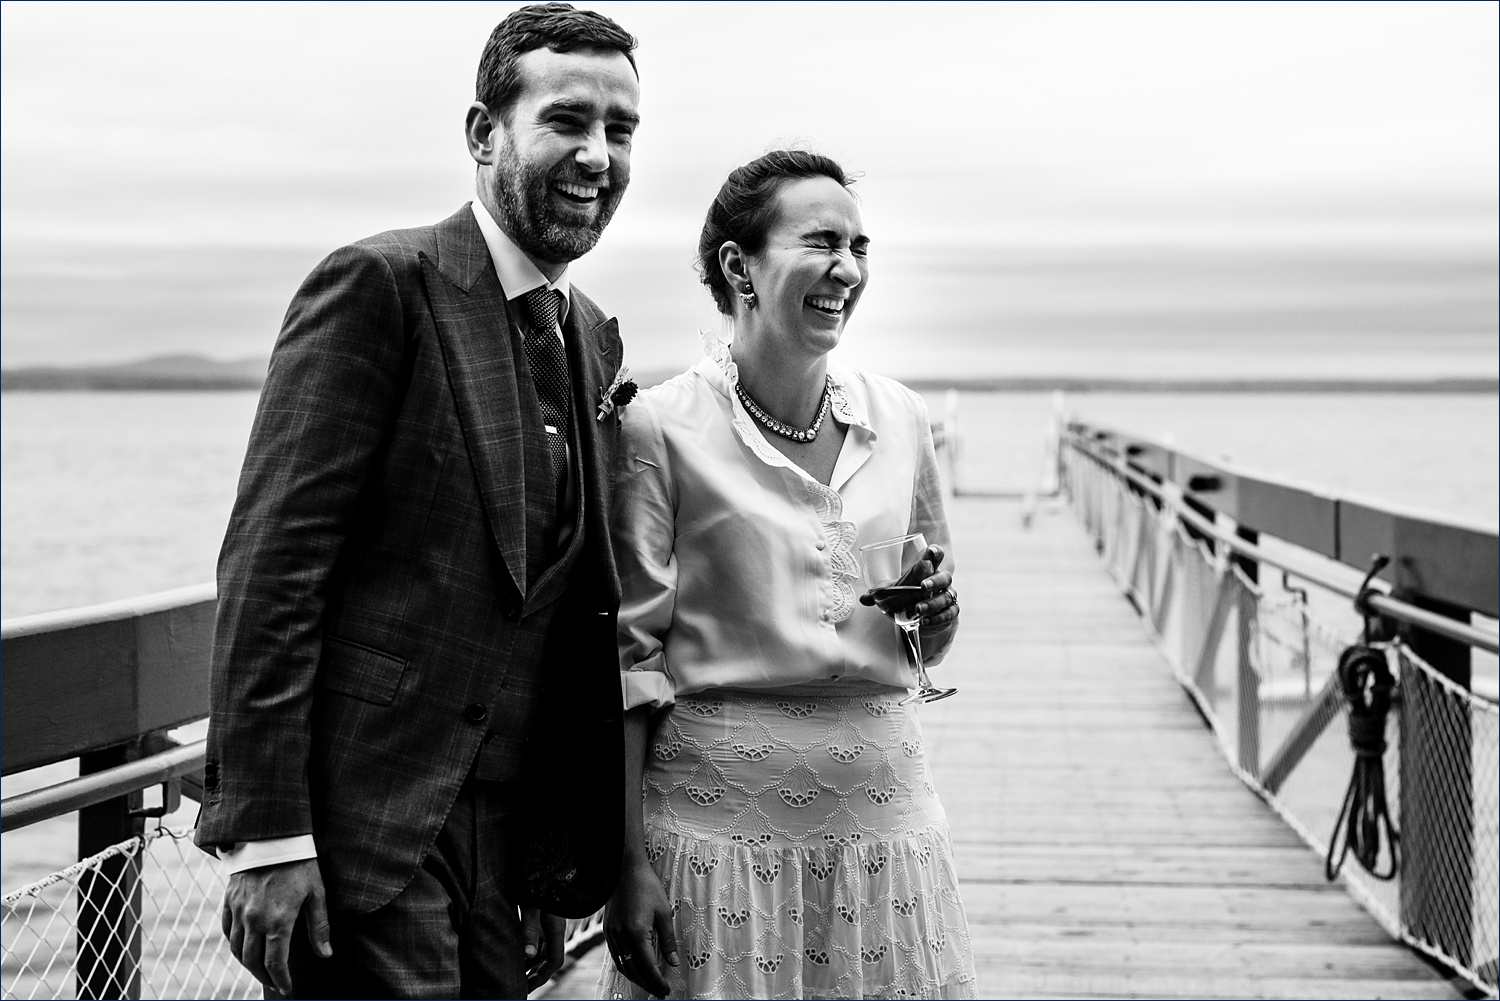 The bride and groom share a laugh together on their Maine wedding day on the dock at College of the Atlantic